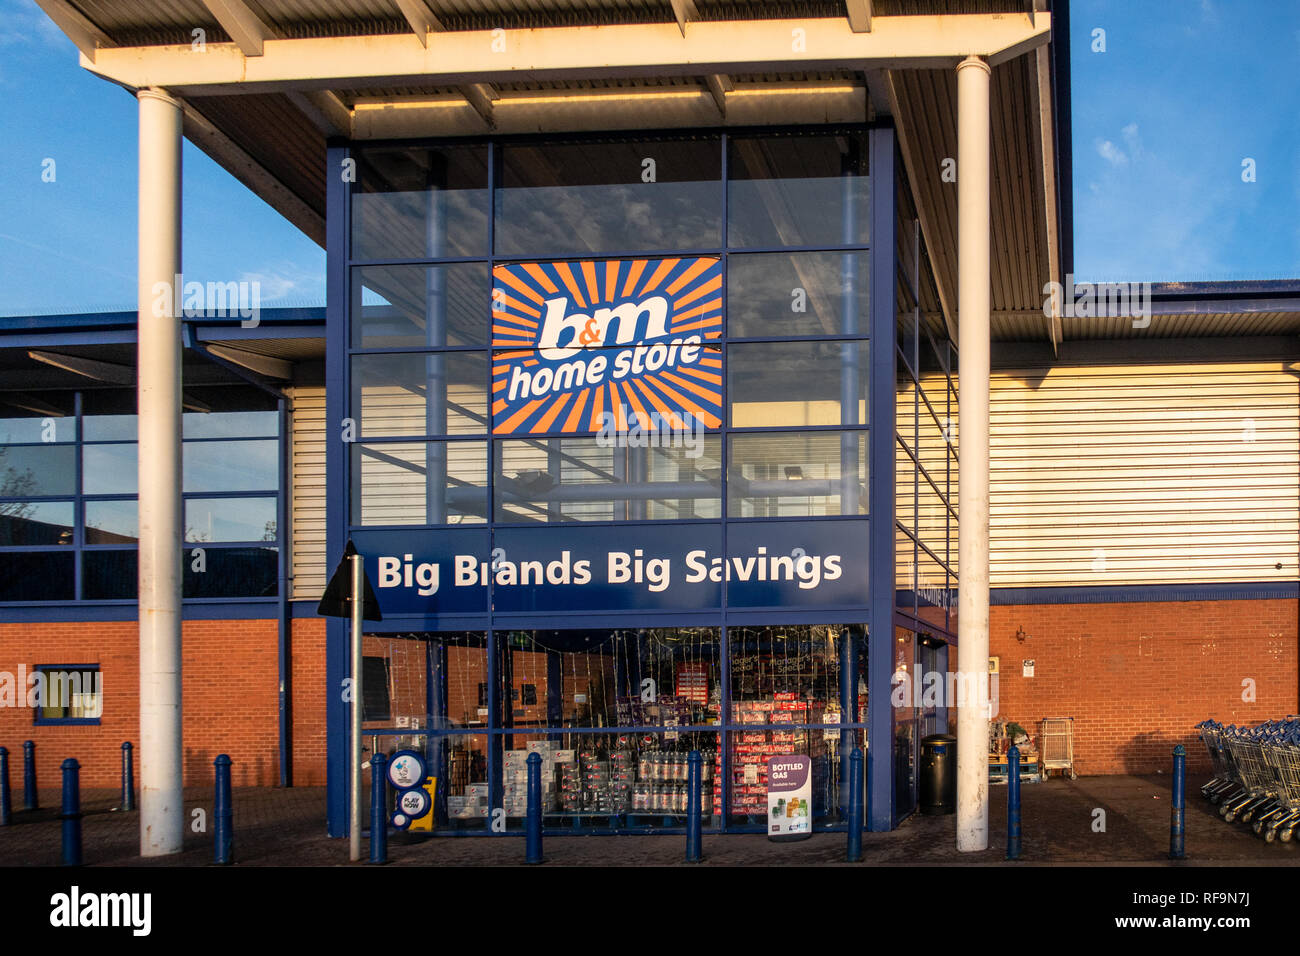 Entrance to B&M home store at Cheadle, Heath, Stockport, England, UK Stock Photo